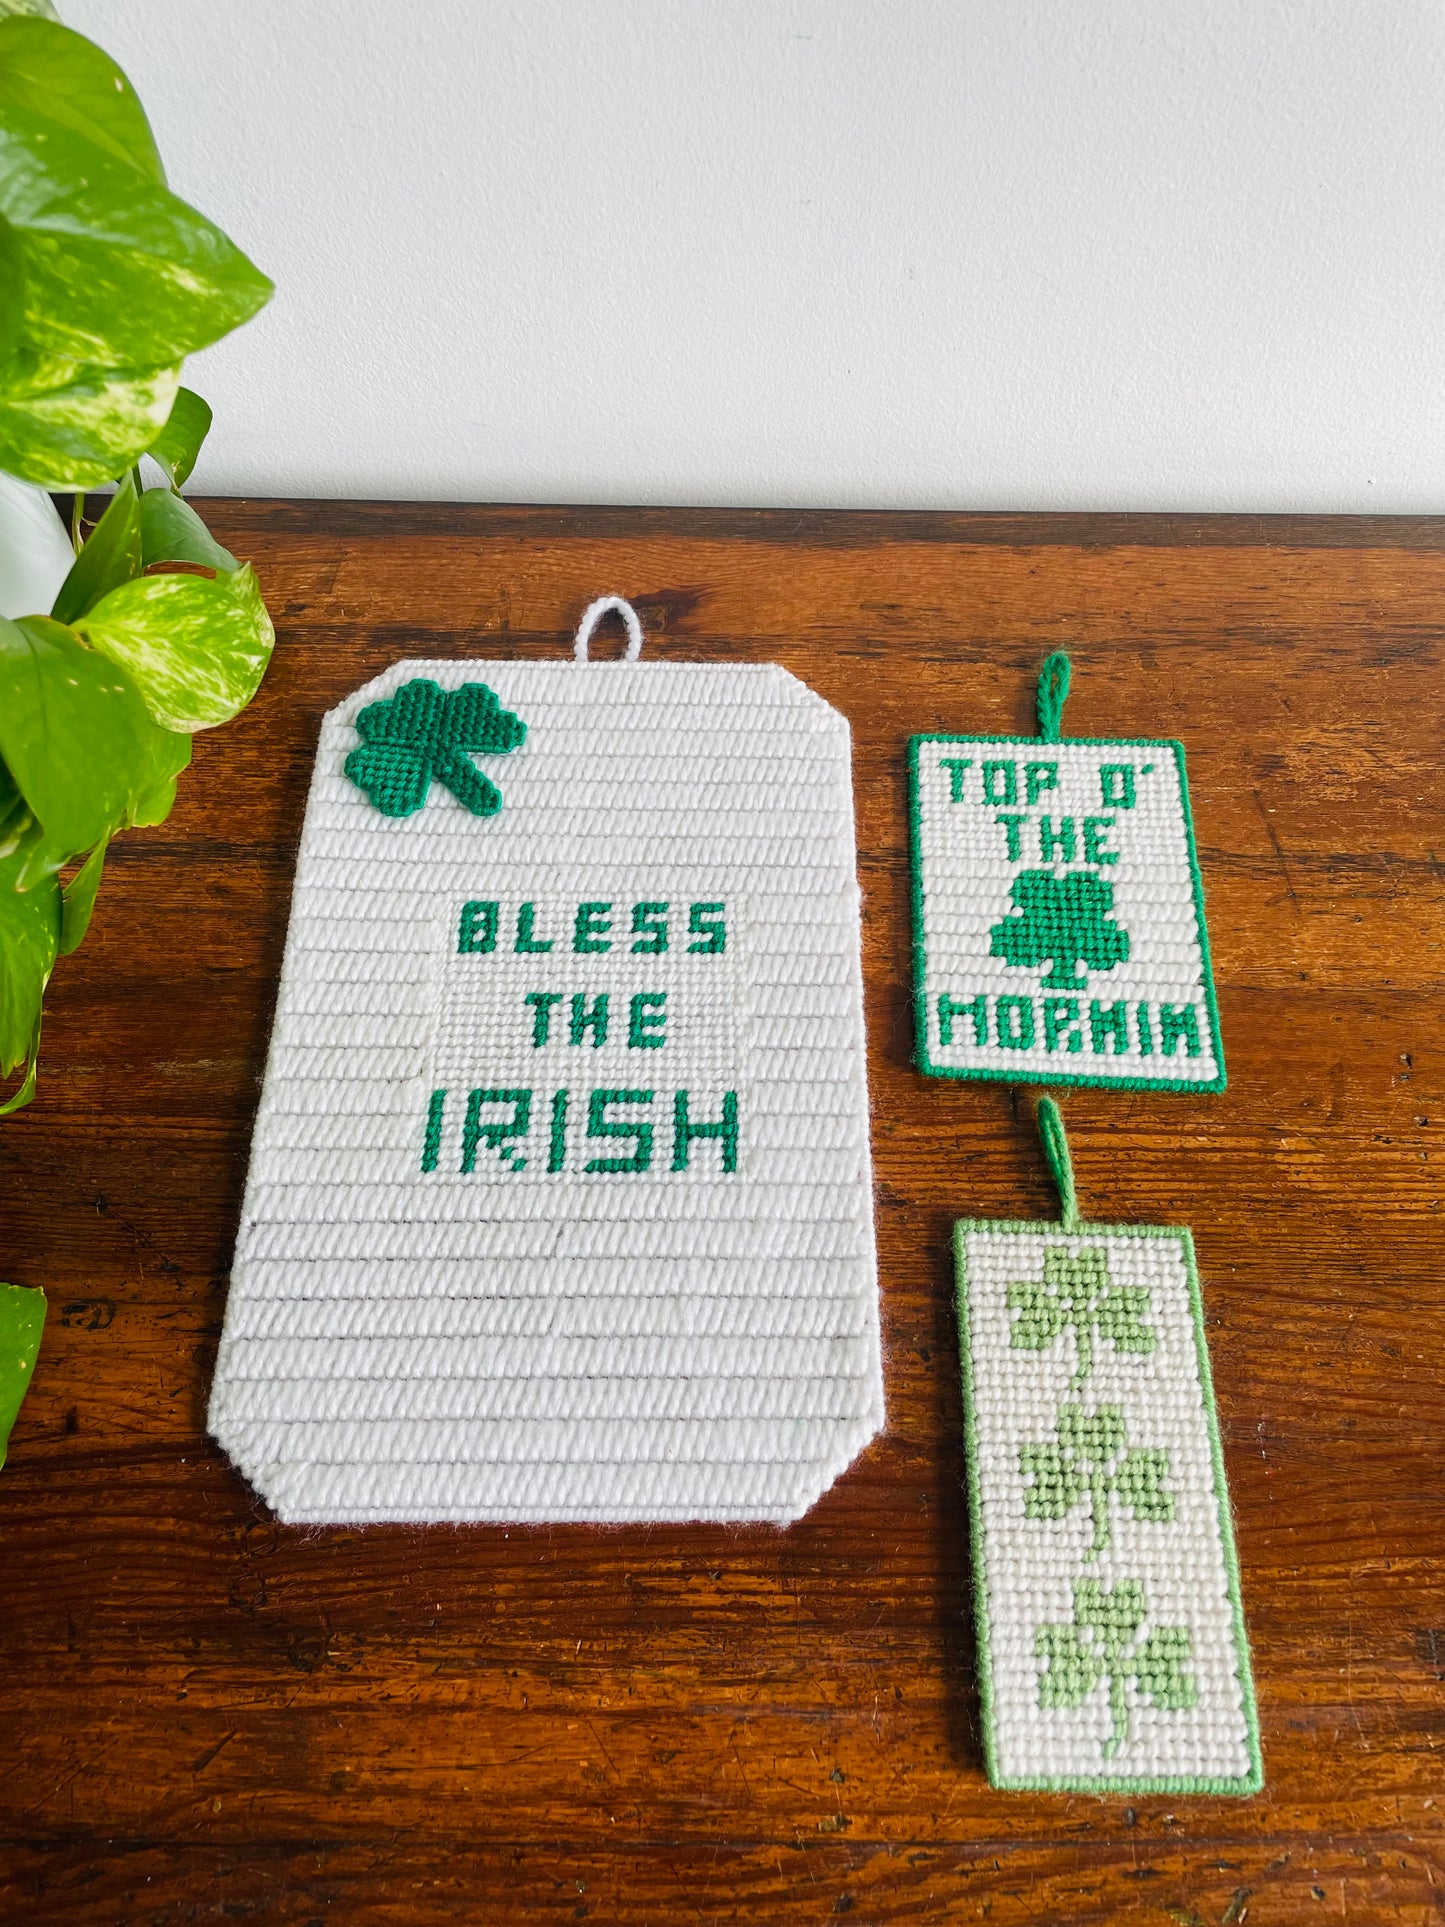 St. Patrick's Day Holiday Bundle of Plastic Canvas Art Decorations - Bless The Irish, Top O' The Mornin, & Shamrock Graphics - Set of 3